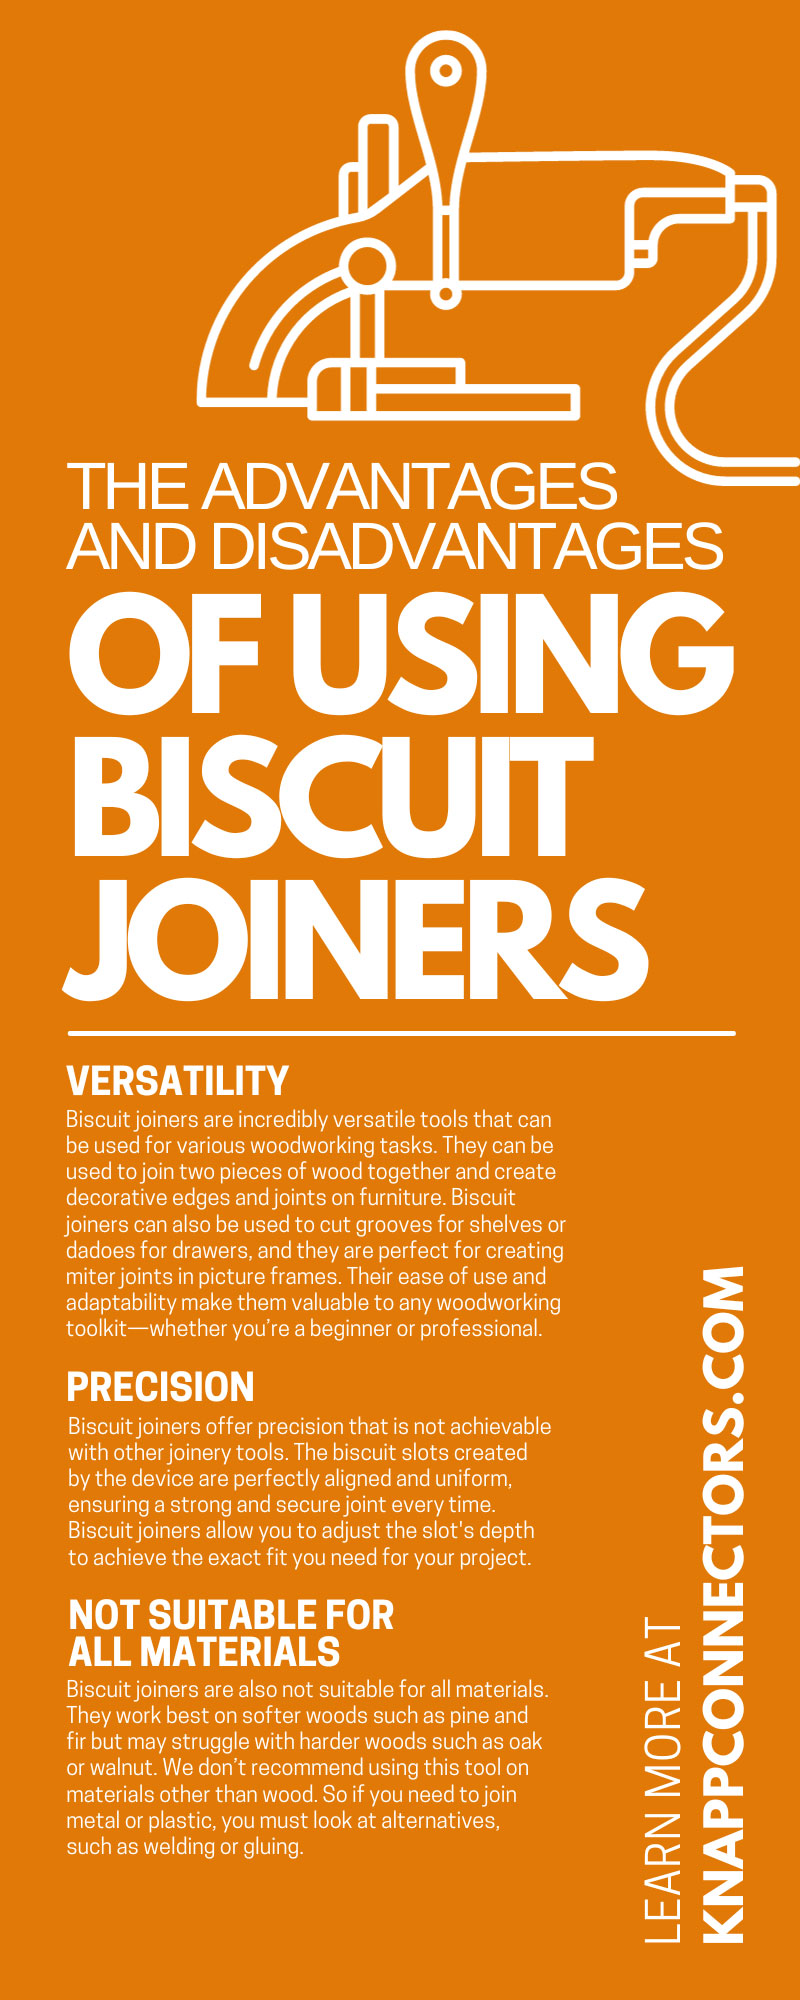 The Advantages and Disadvantages of Using Biscuit Joiners